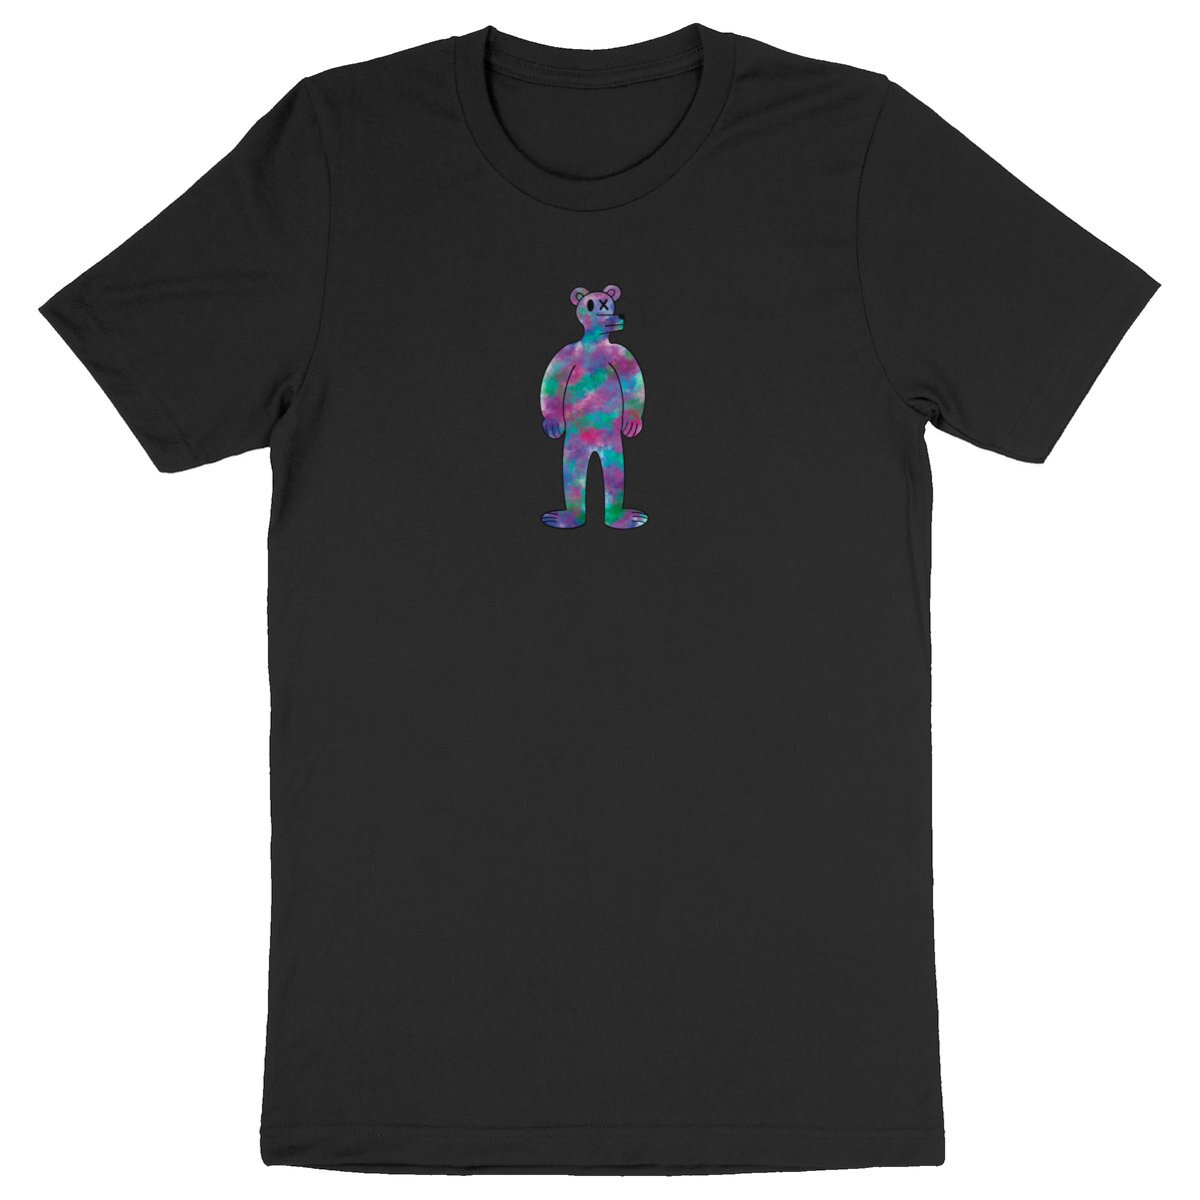 Water Color Bear Graphic Tee